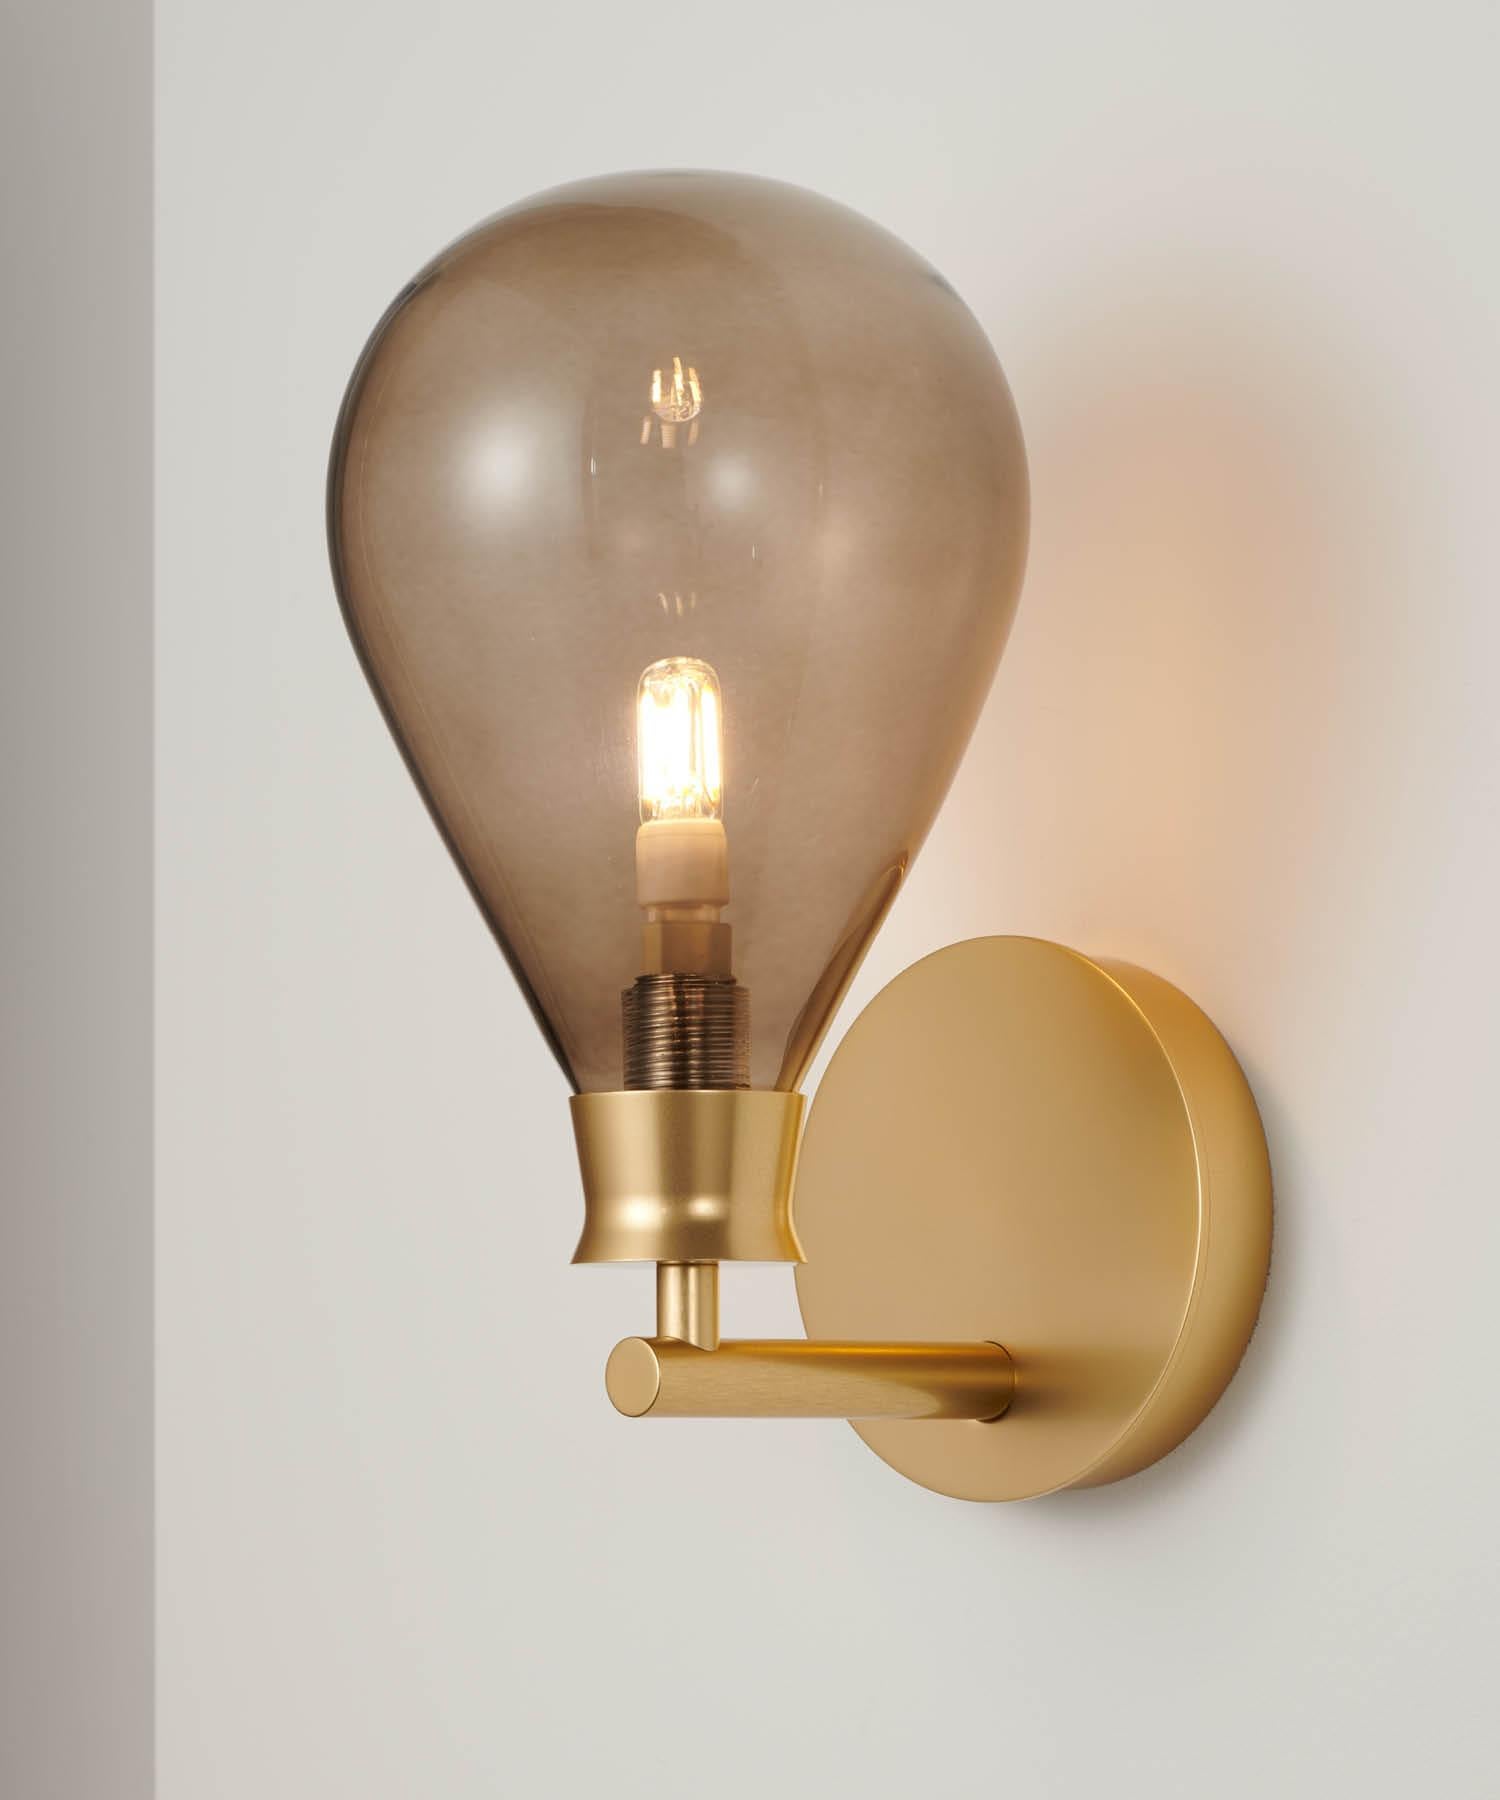 British Cintola Wall Light in Satin Gold with Bronze Handblown Glass Globe For Sale